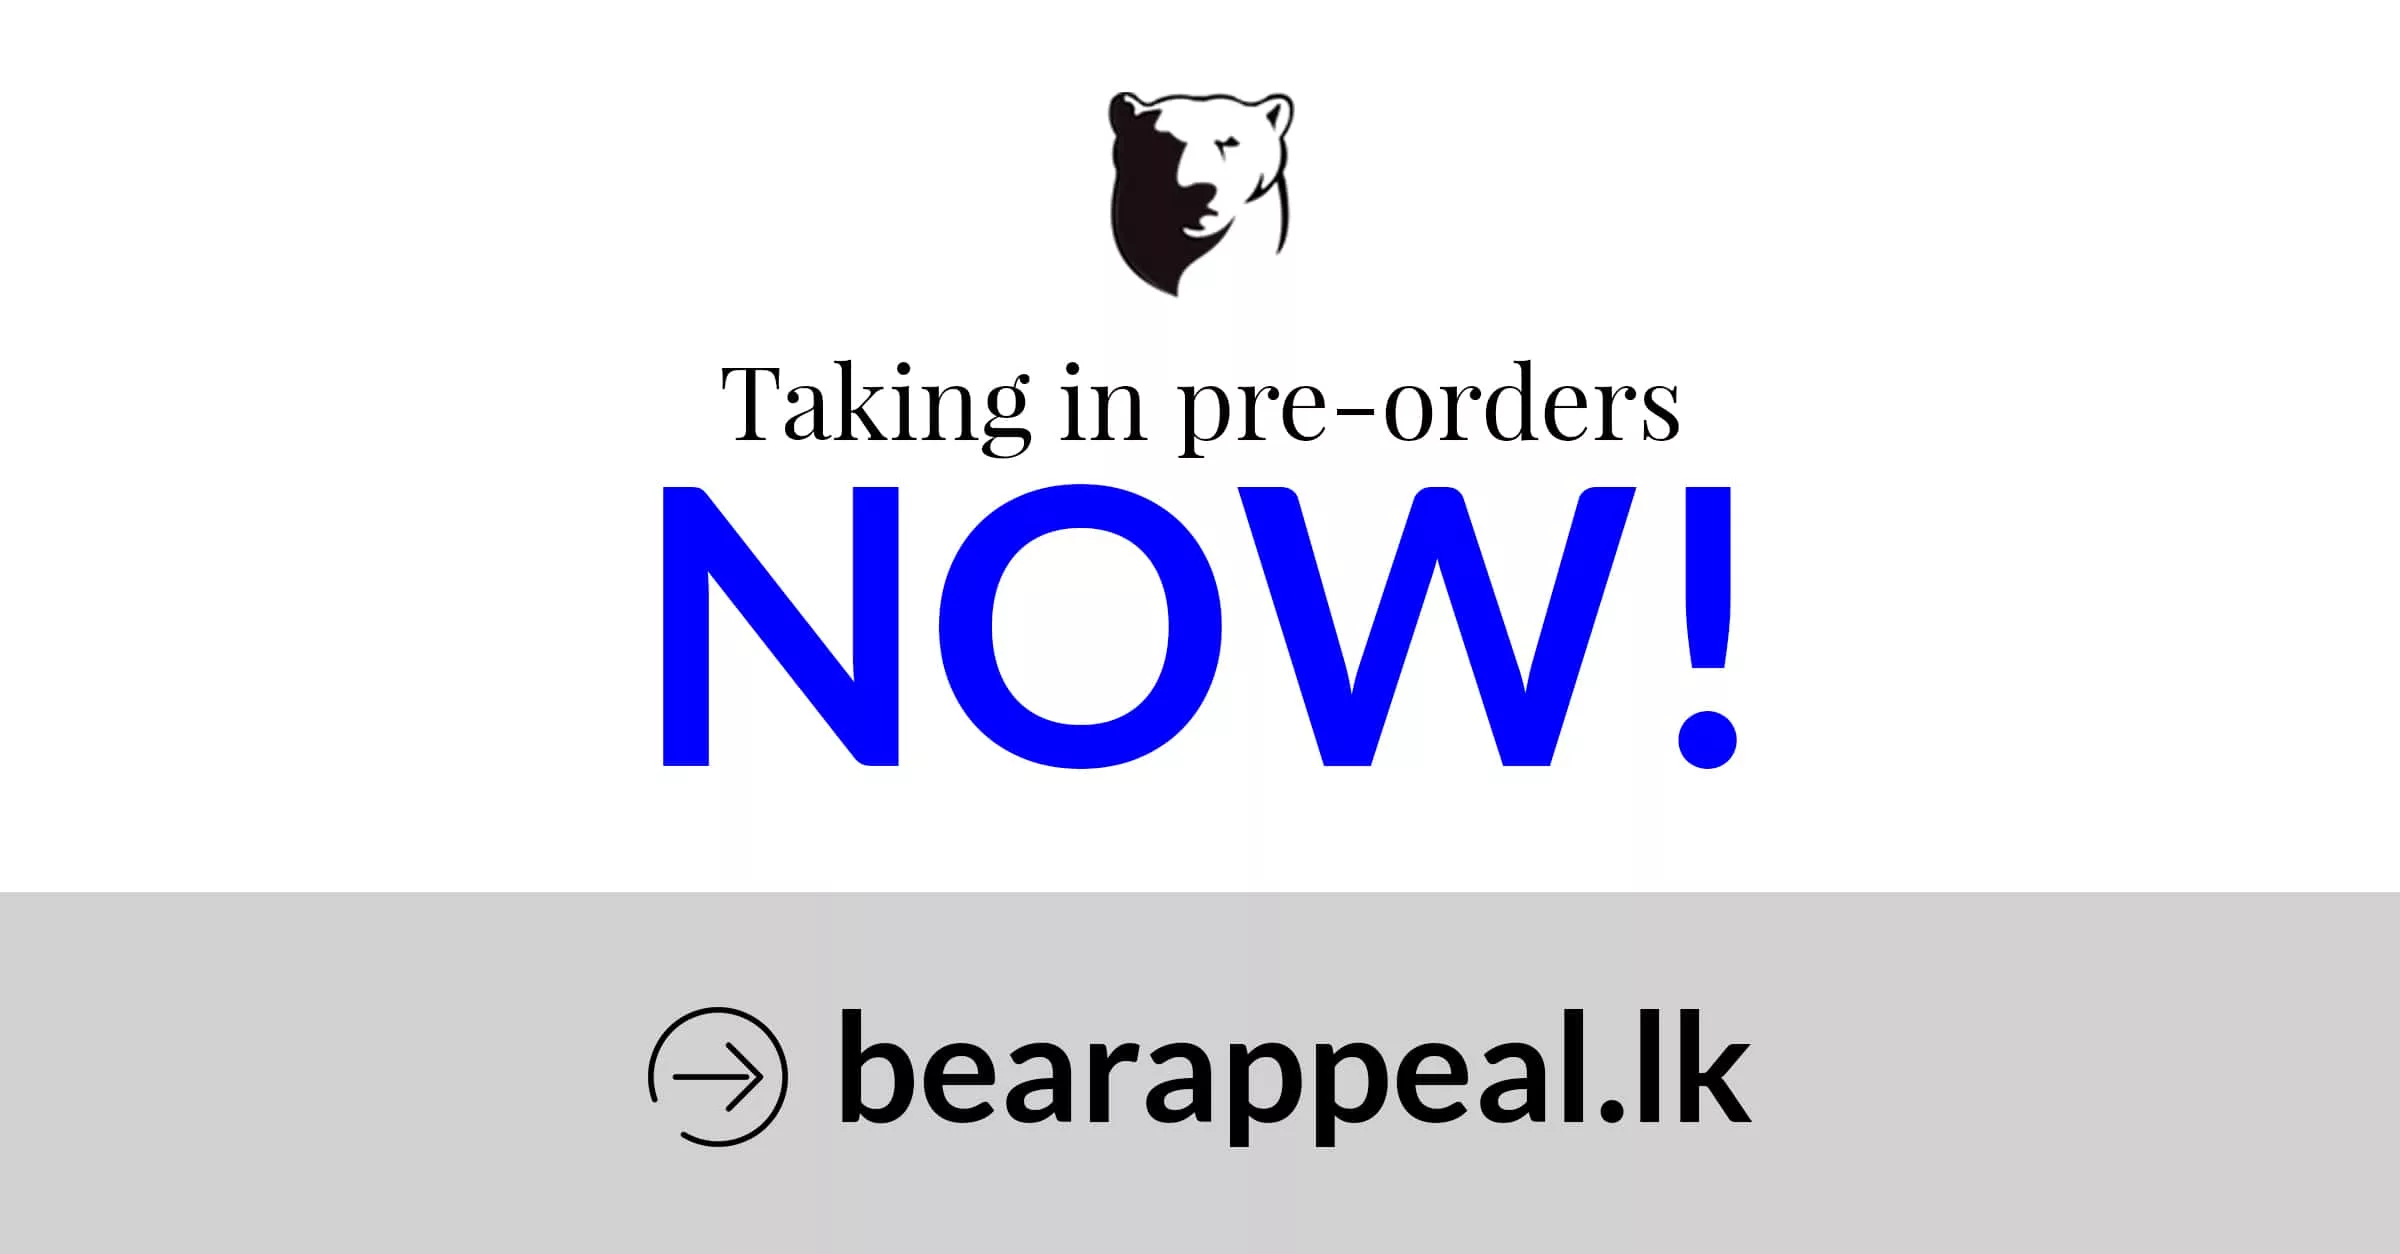 You can pre-order with us now!